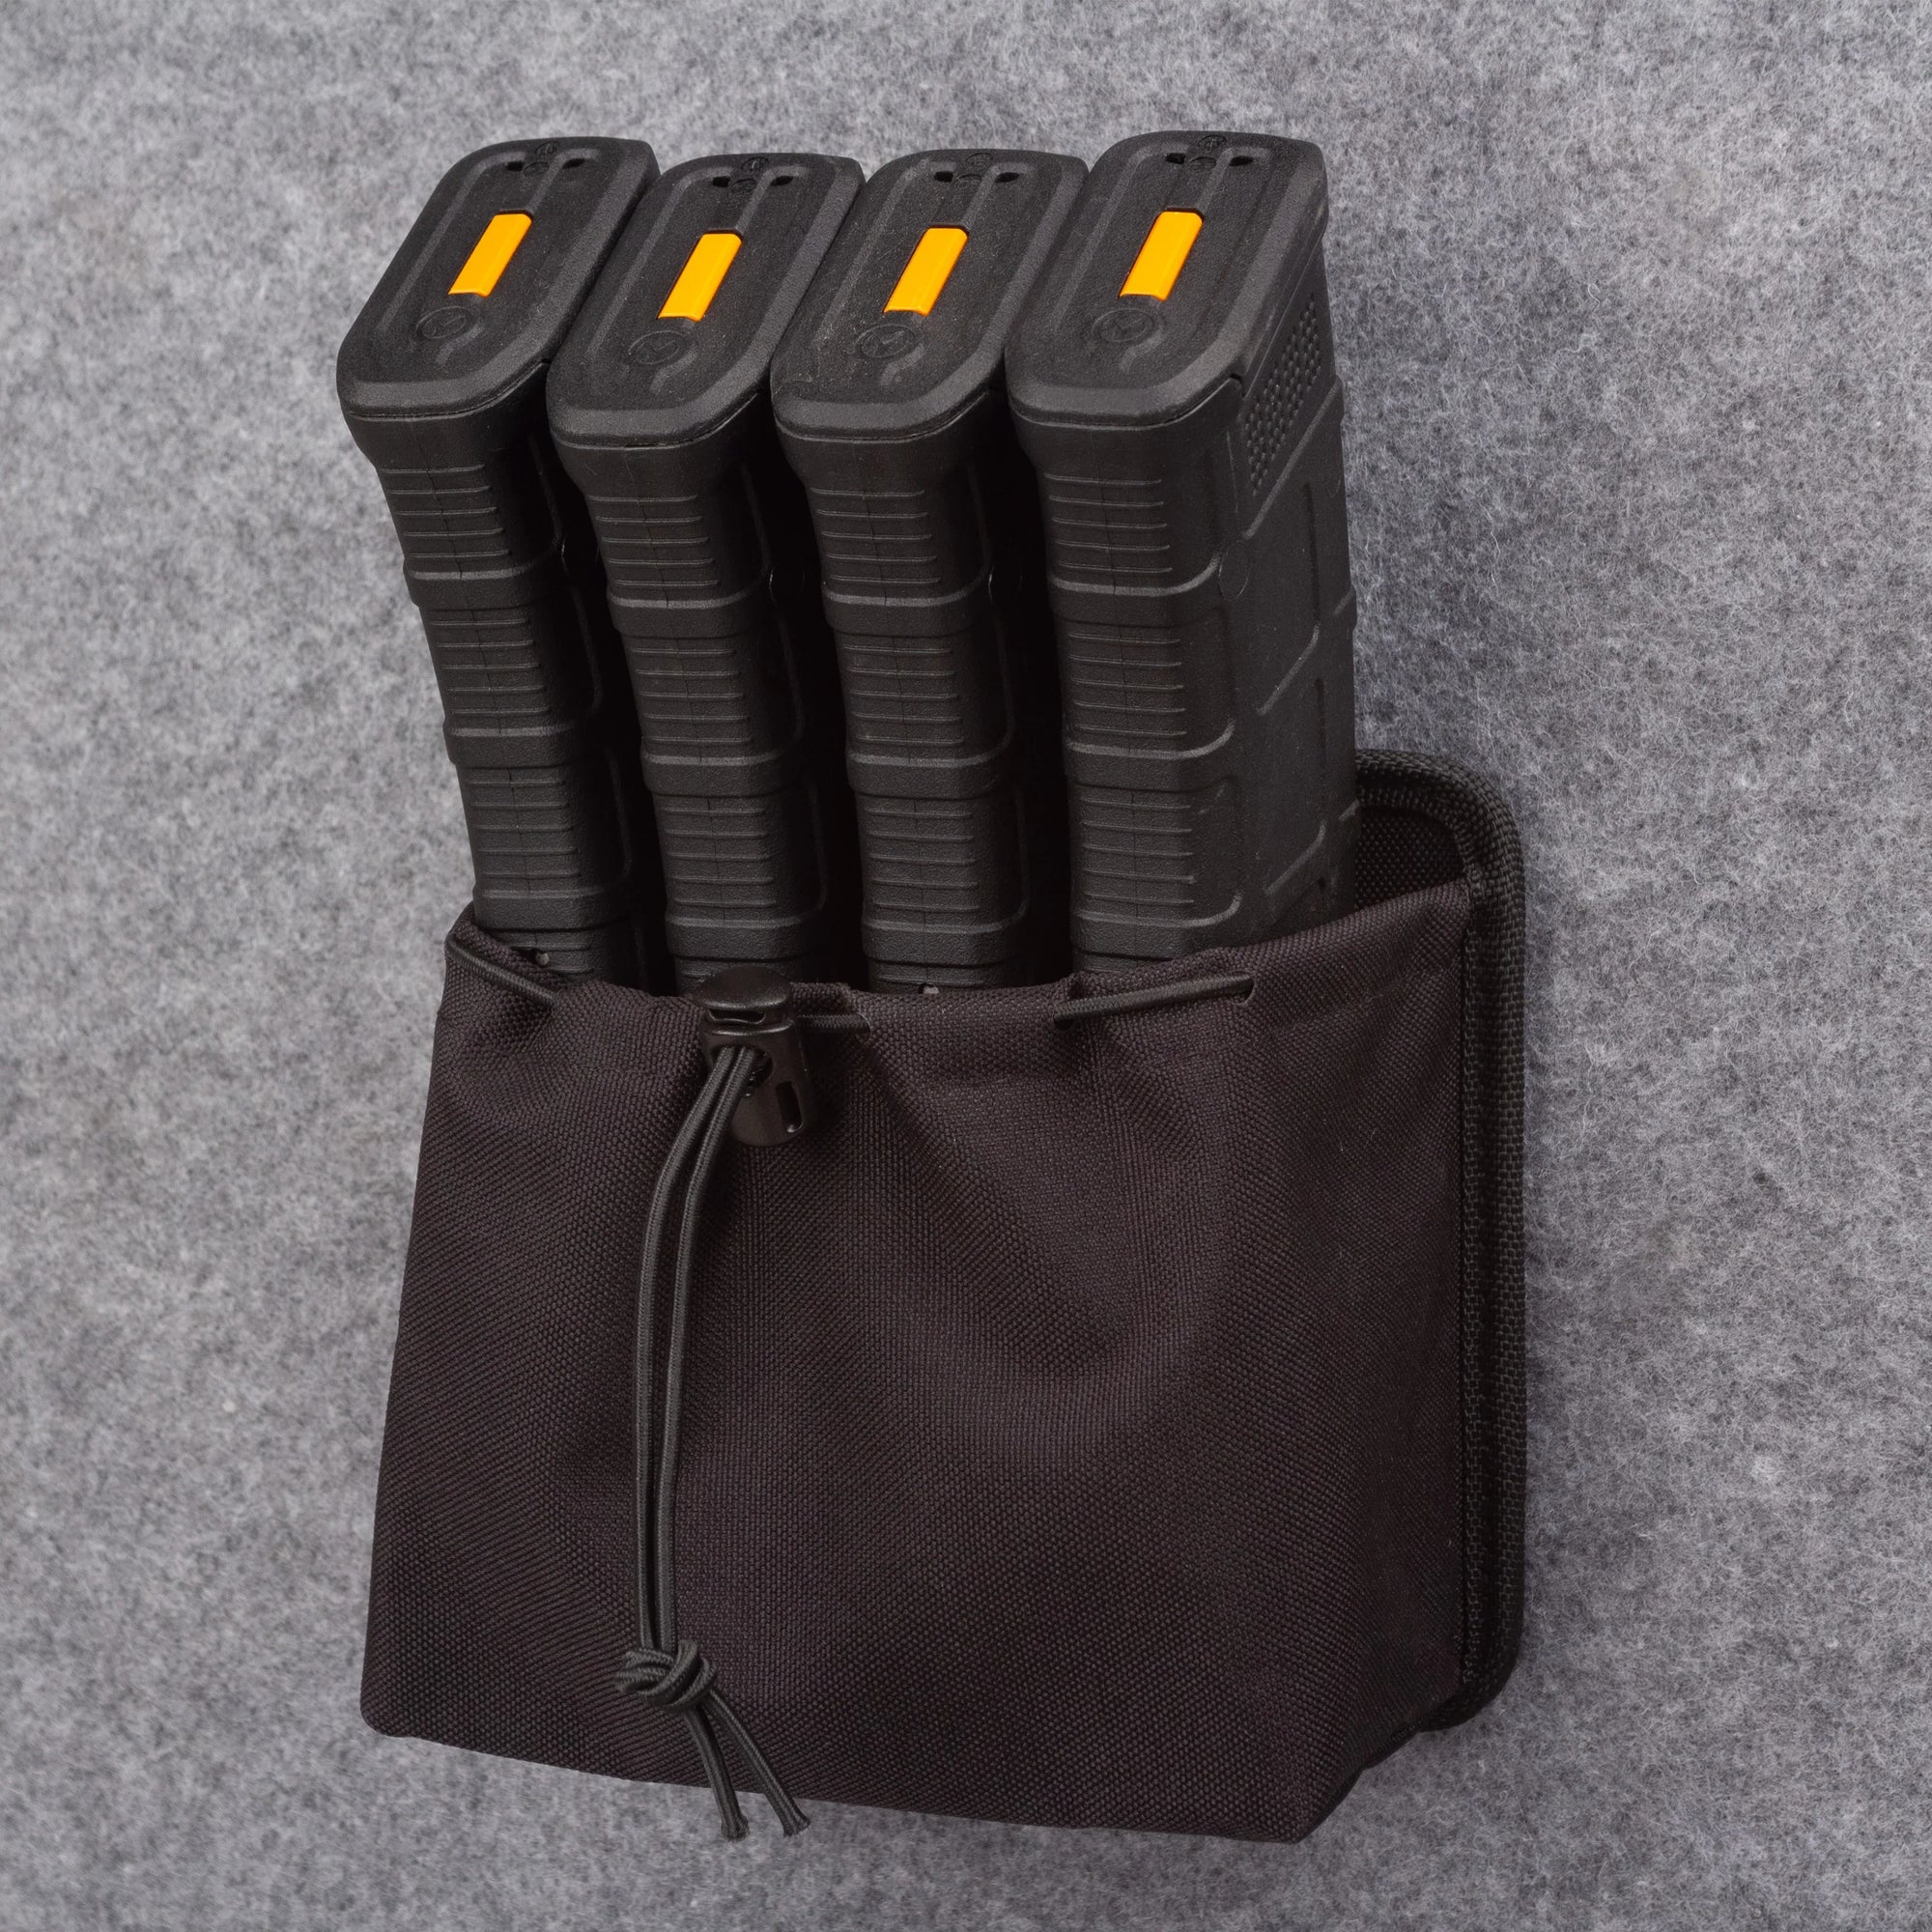 Tracker PG563 General Pocket with AR Mags